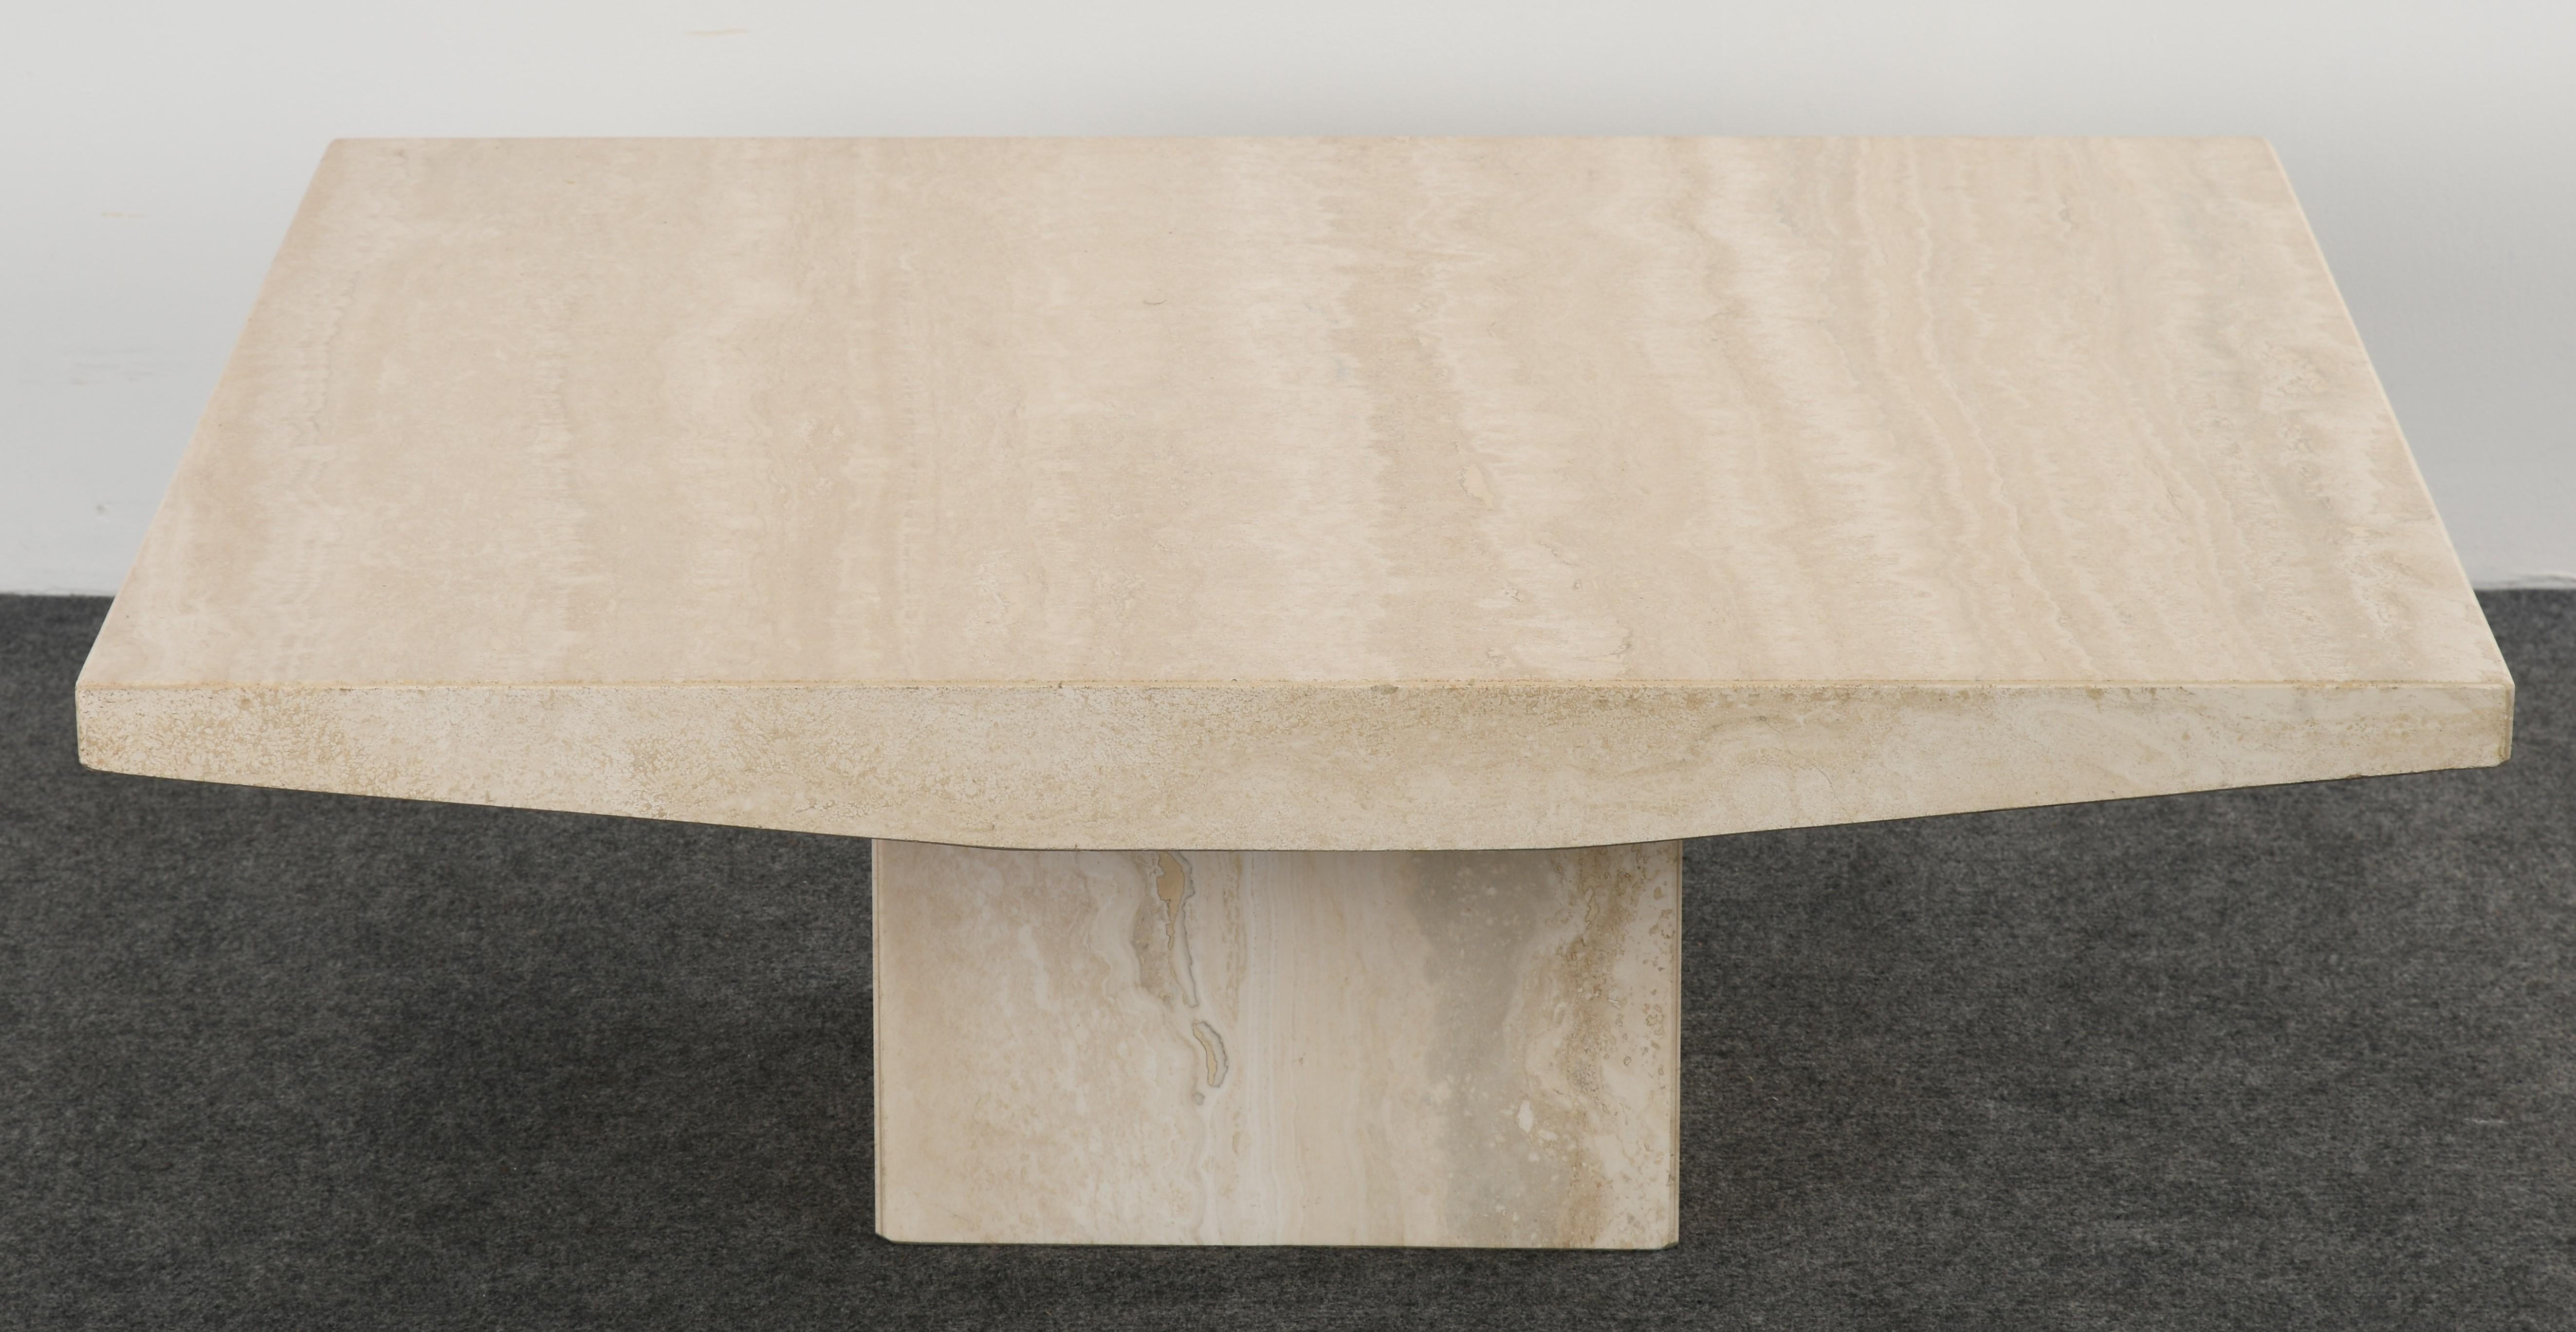 A fabulous Stone International cocktail or coffee table made of travertine marble. This Minimalist table would work in many modern interiors. Structurally sound with age-appropriate wear with some minor etching to surface, however, not distracting.